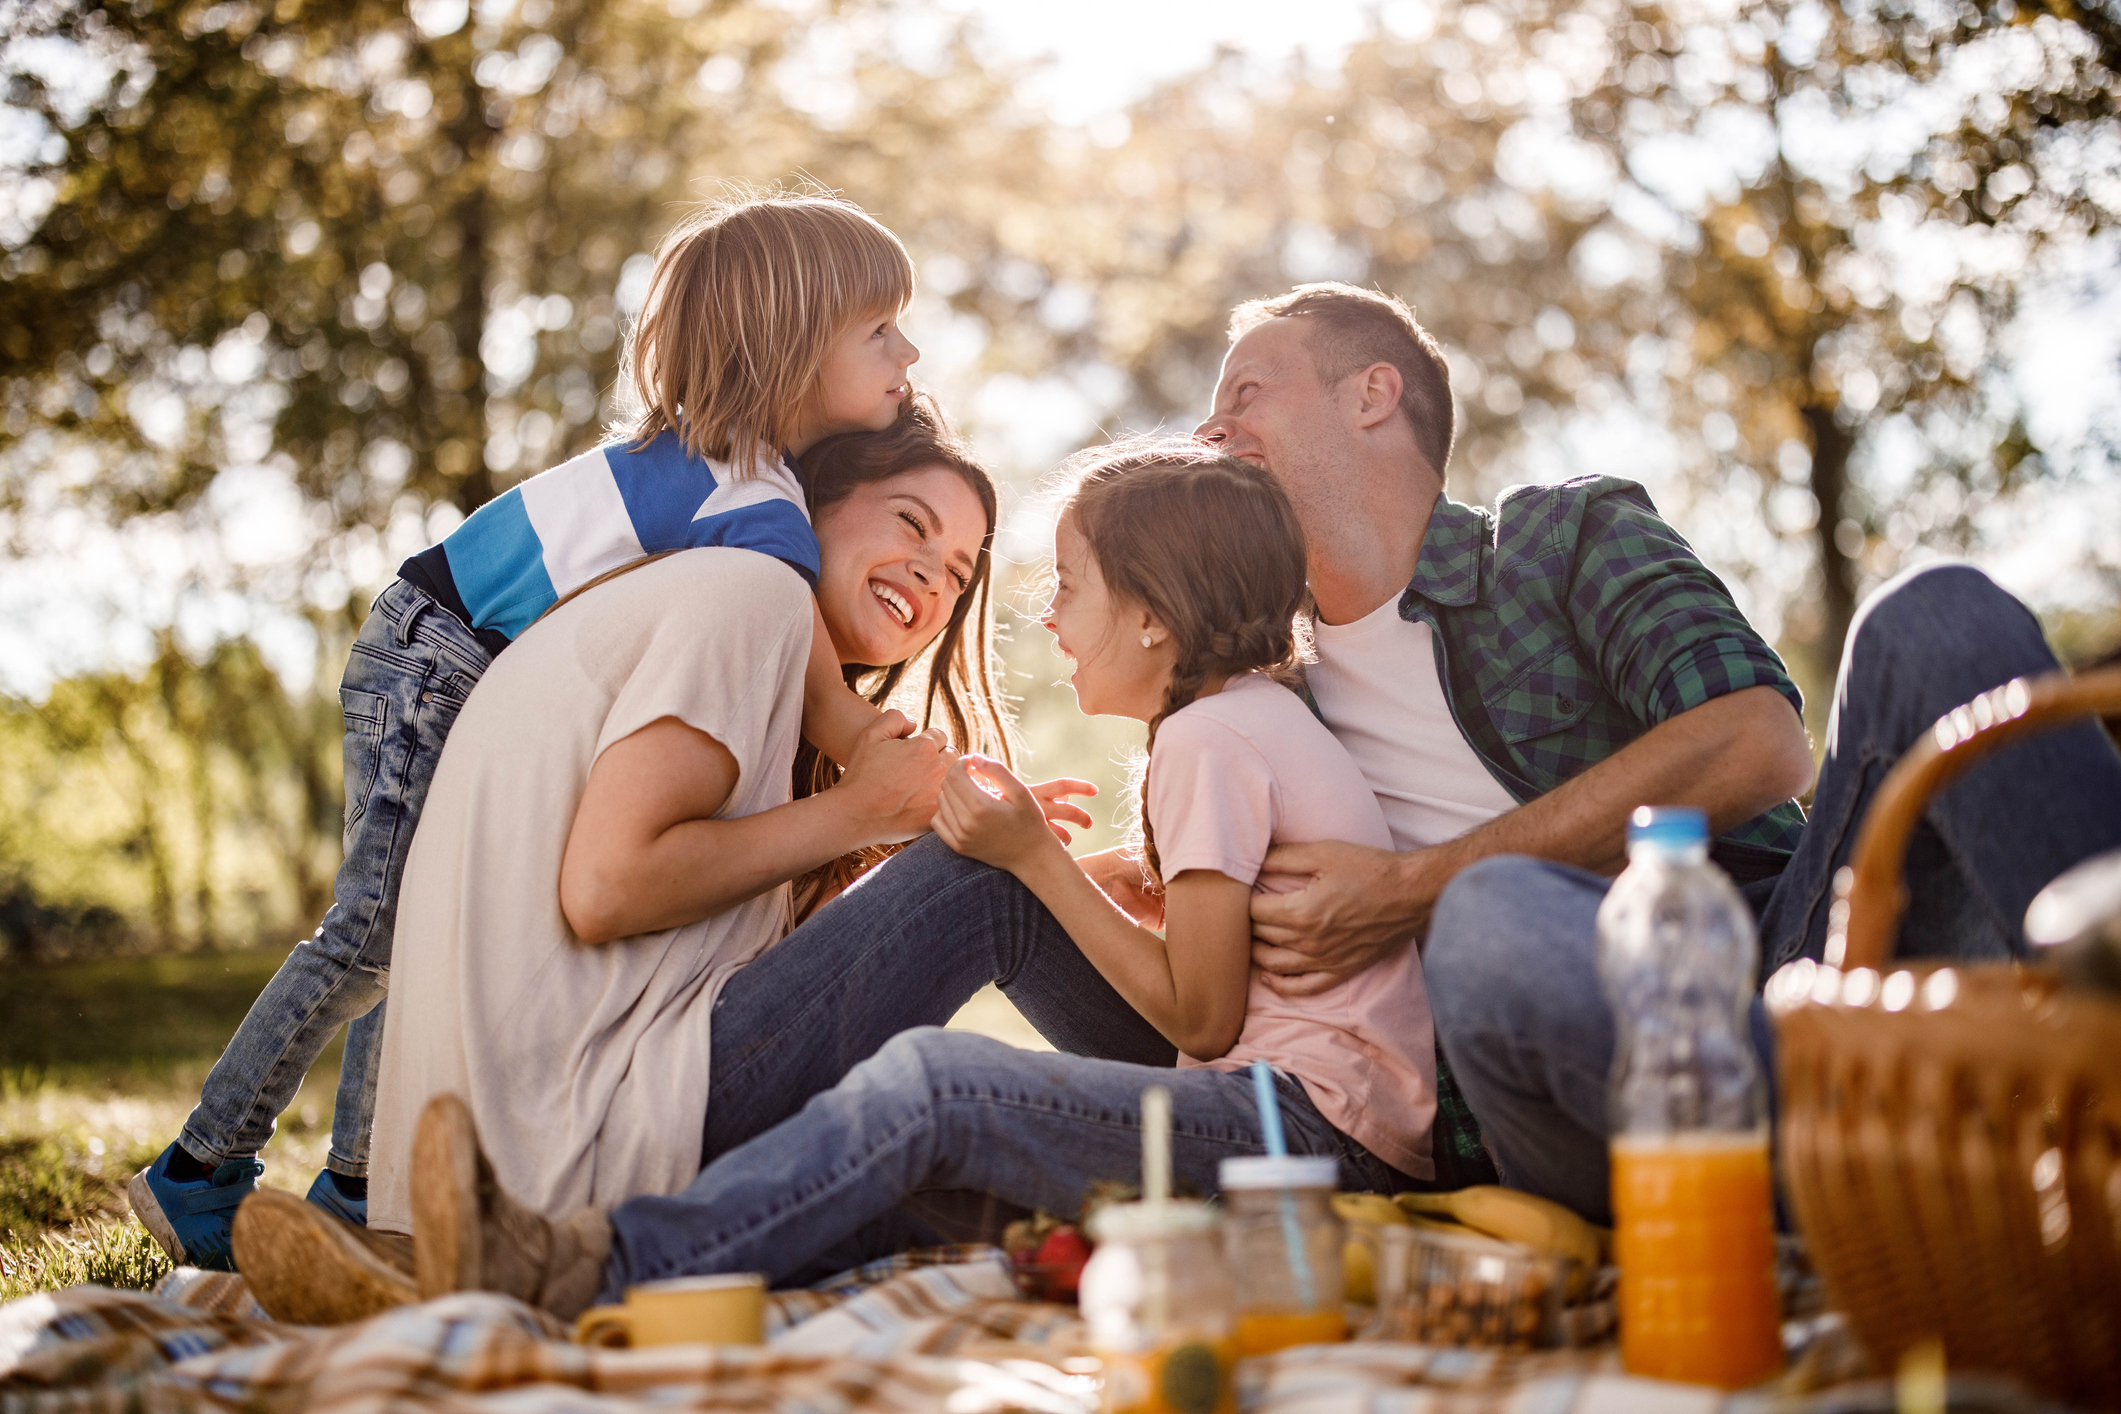 Cheerful family having fun on a picnic in spring day.